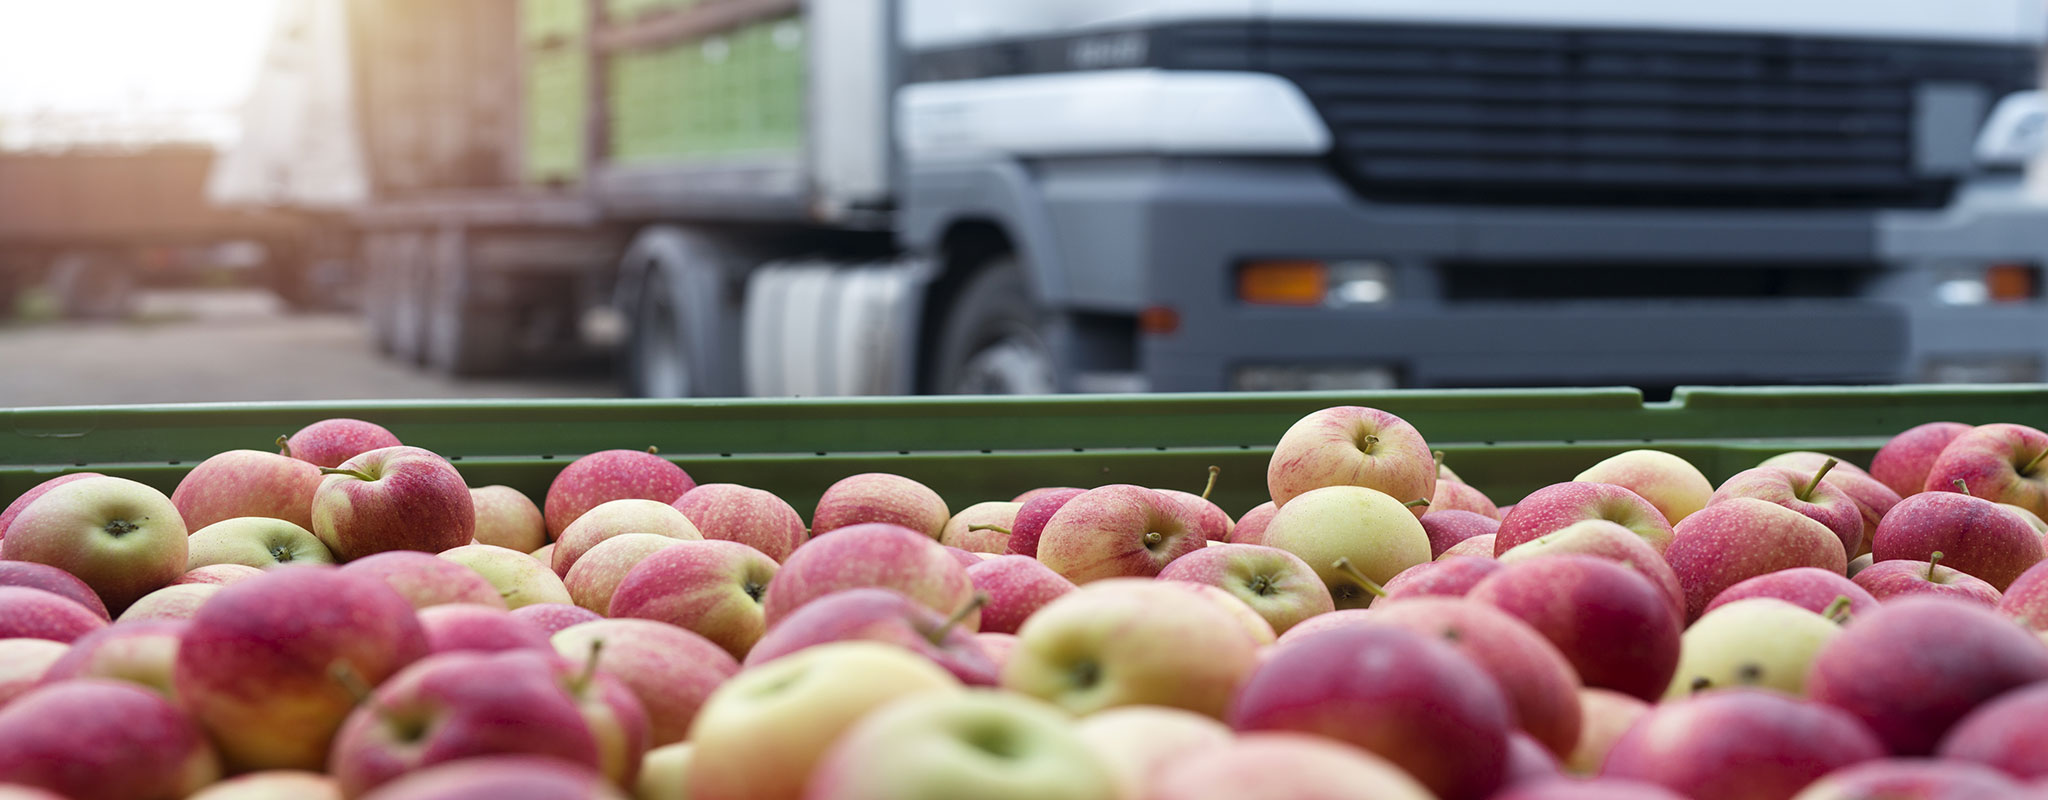 Close up of shipping crate full with apples with freight truck in background